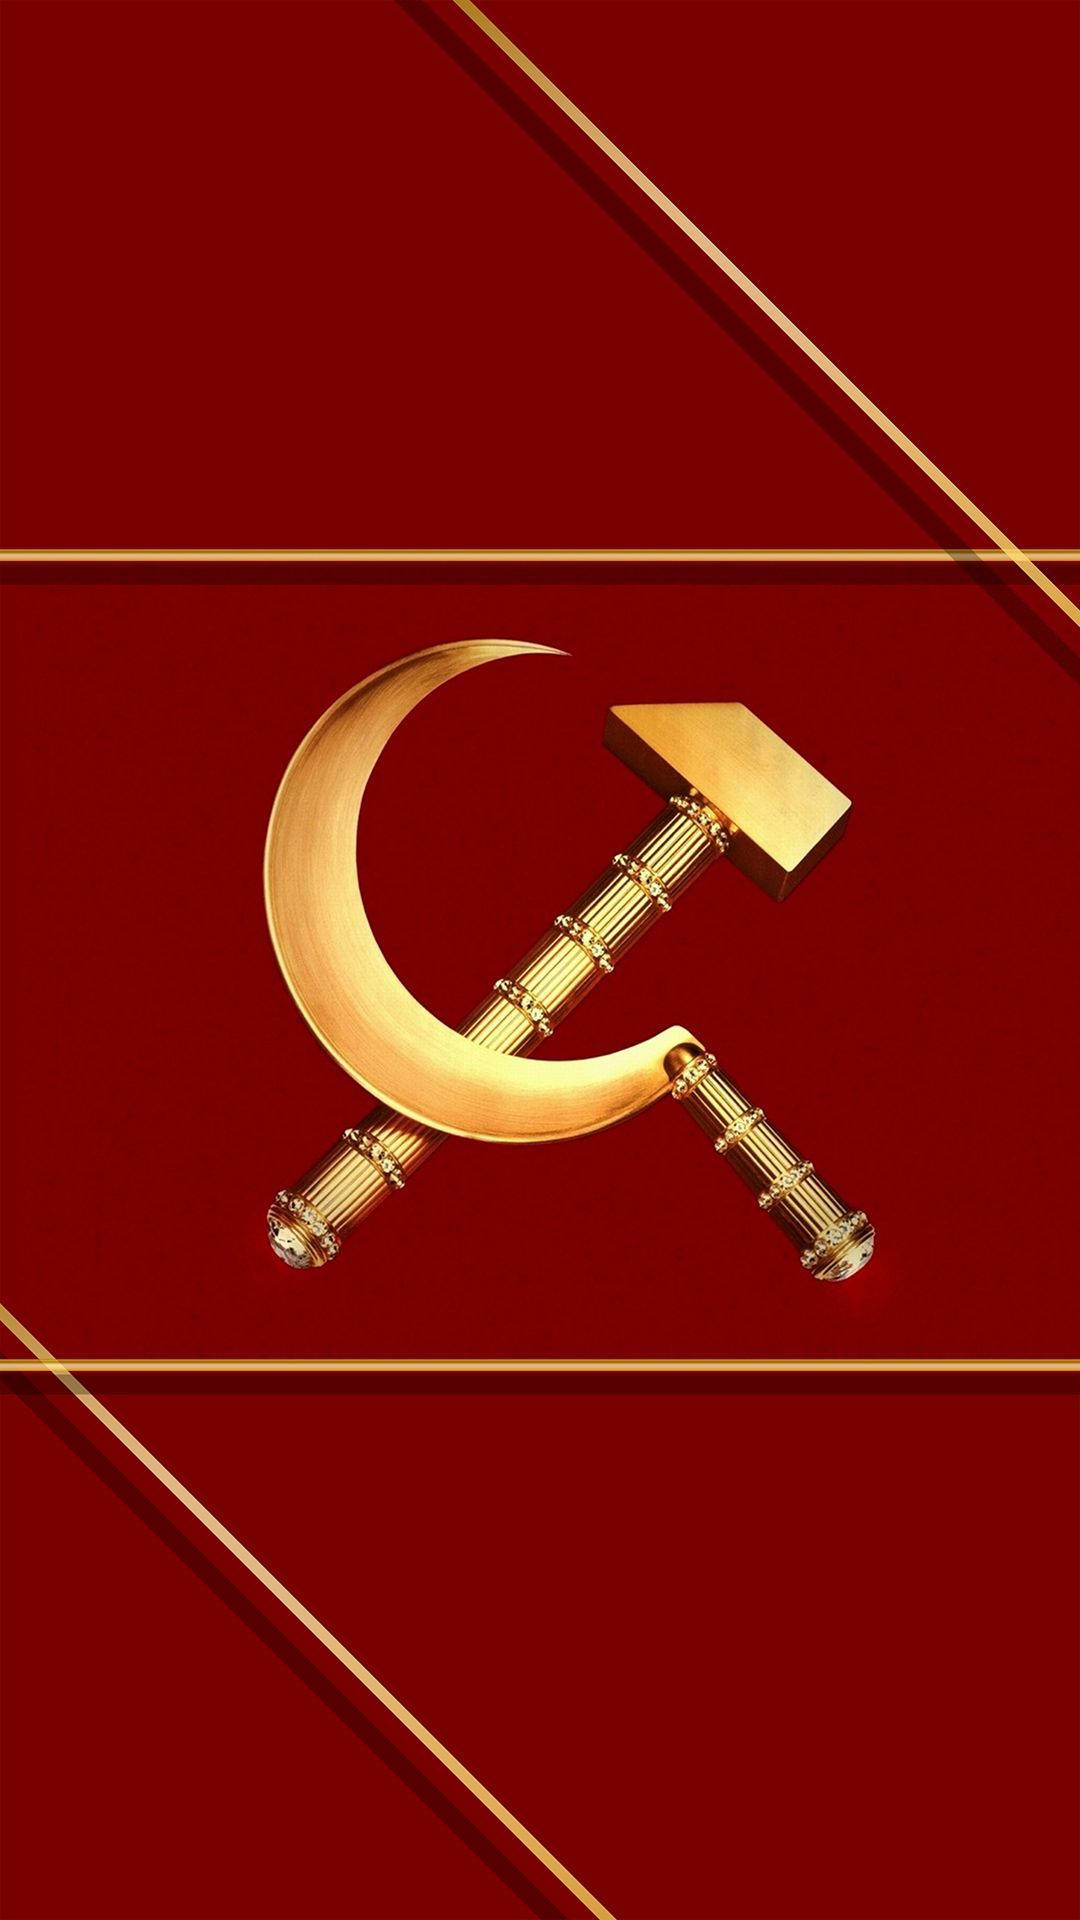 Russia Symbol Sickle And Hammer Wallpaper